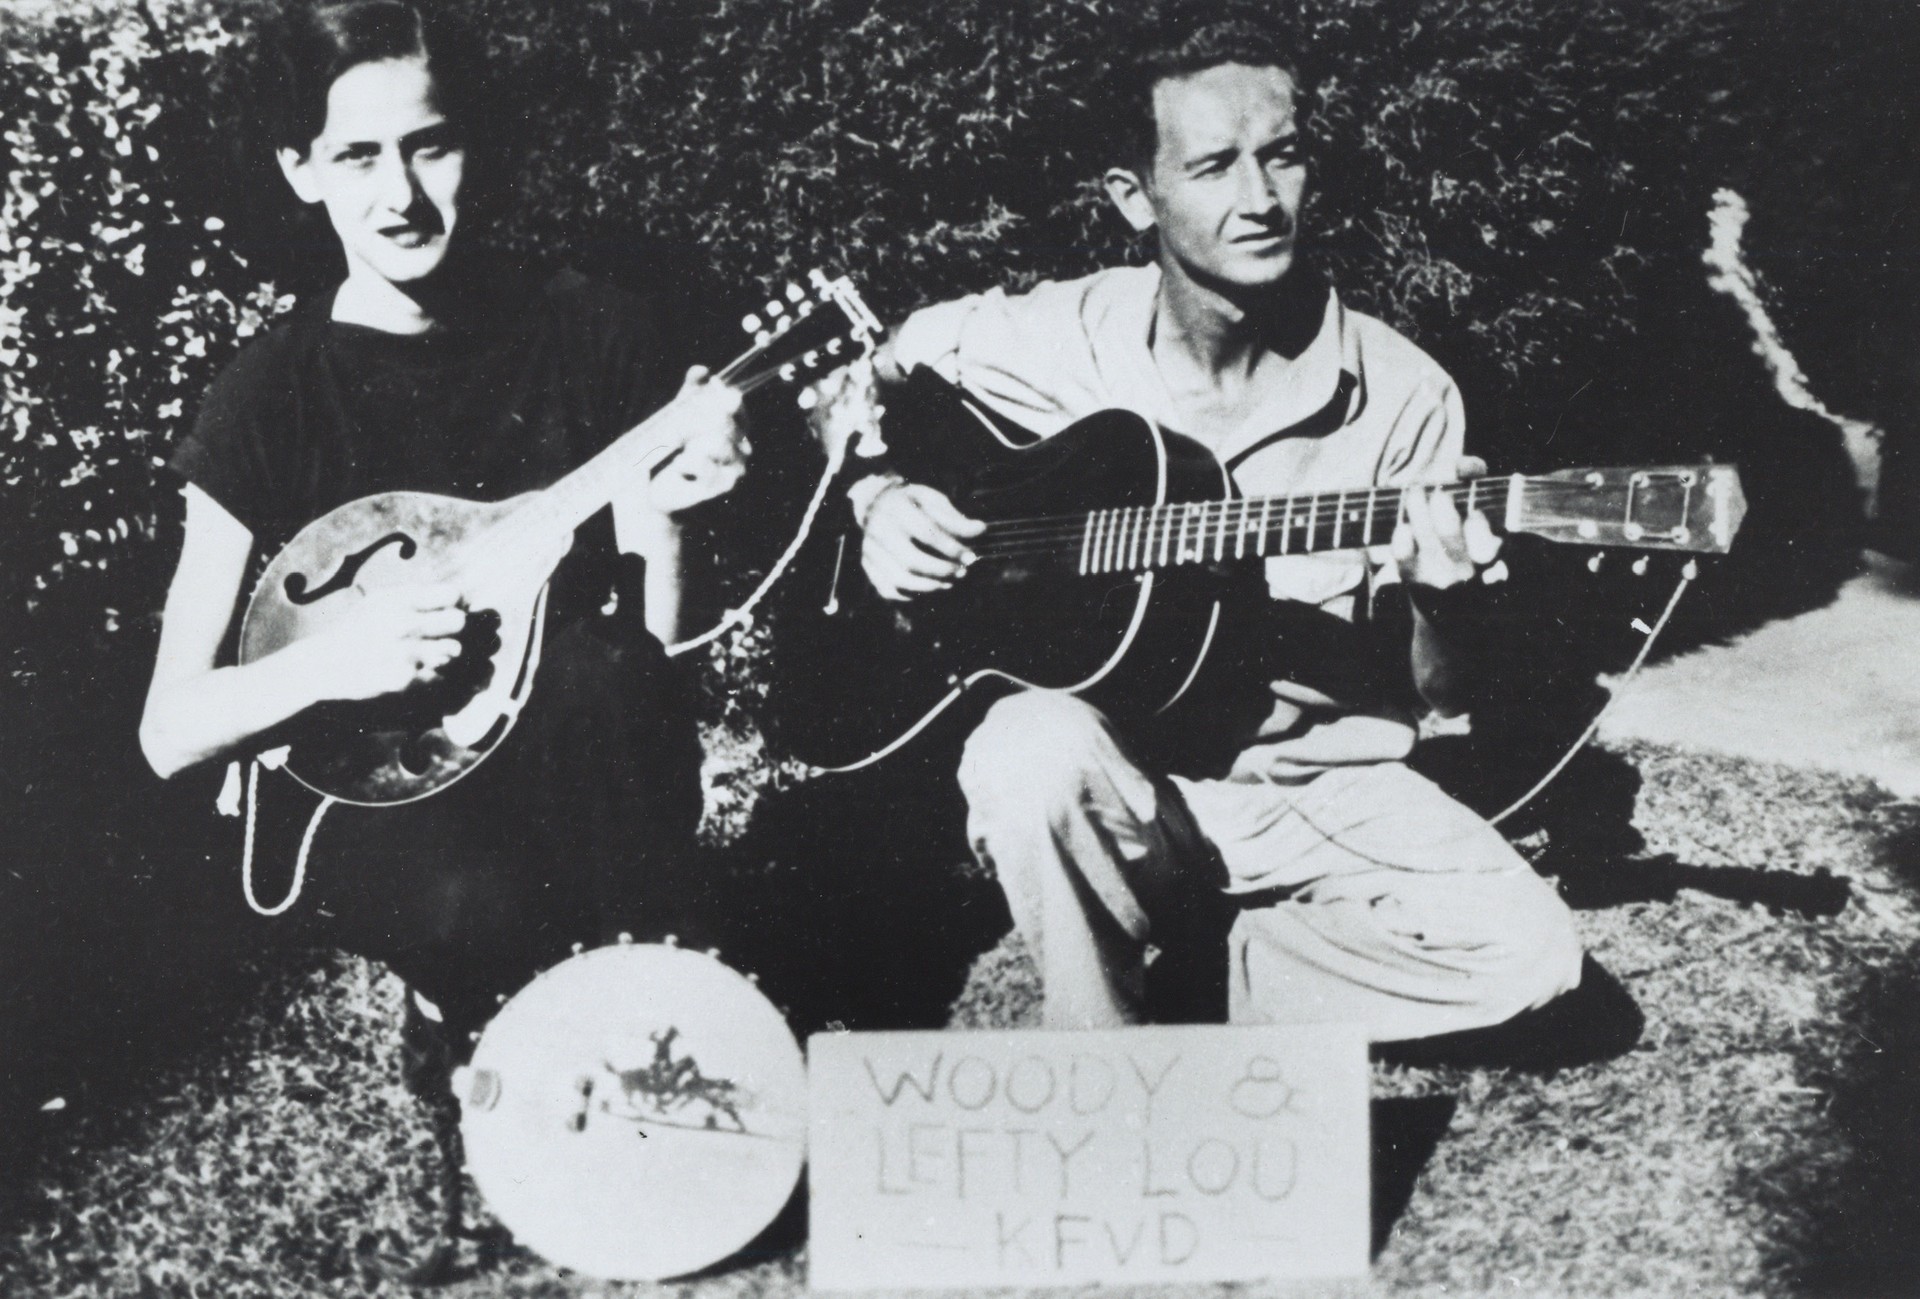 Maxine “Lefty Lou” Crissman and Woody Guthrie promote their Woody and Lefty Lou radio show on Los Angeles’s KFVD, ca. 1937.